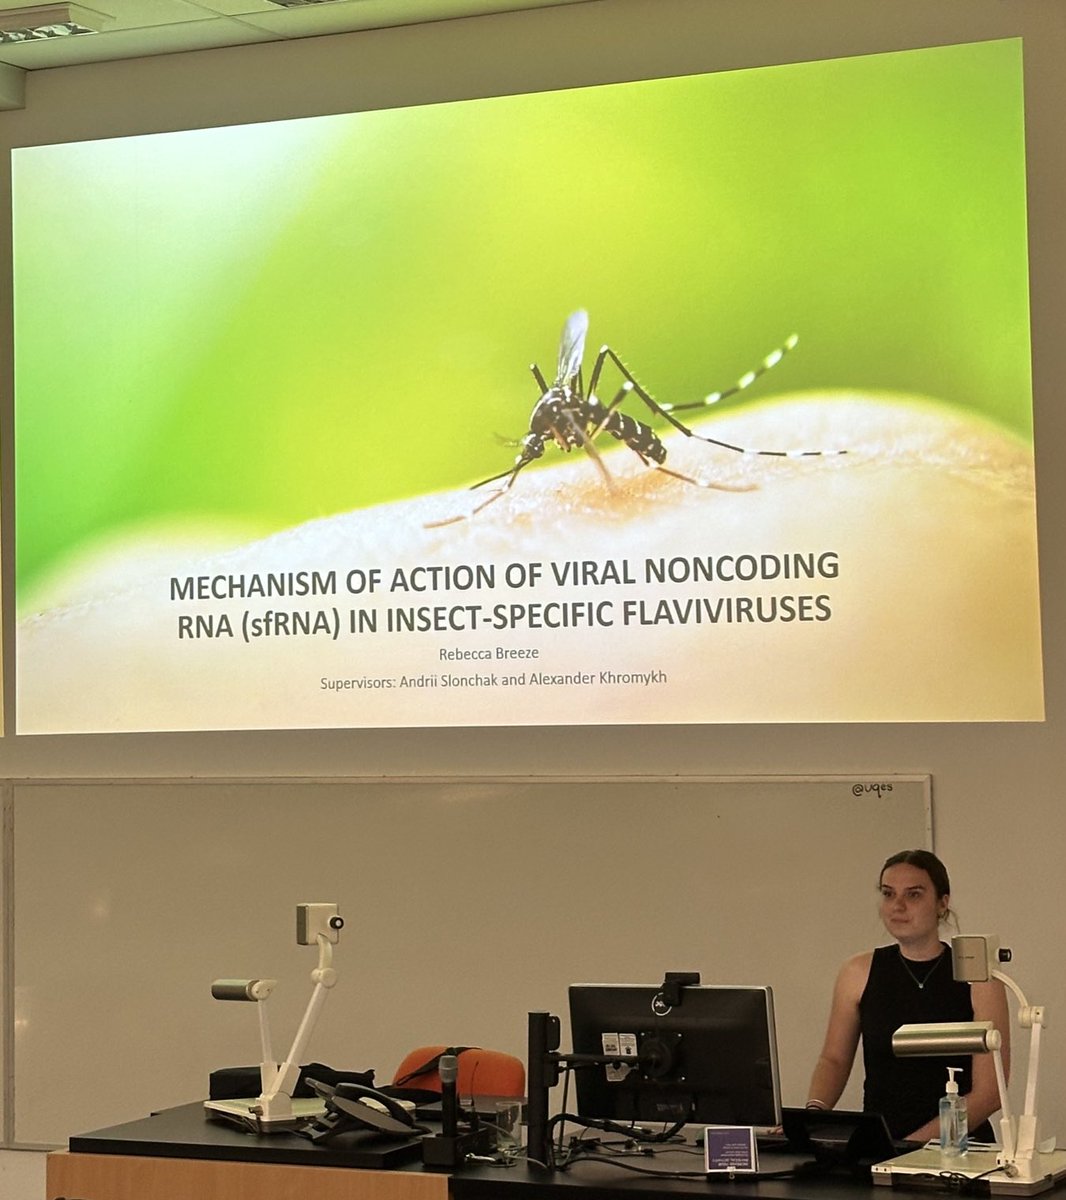 Our second honours student from ⁦@KhromykhAlex⁩ lab with ⁦@andriislonchak⁩ is Rebecca Breeze presenting the pains and successes of generating sfRNA deficient mutants in insect specific flaviviruses.